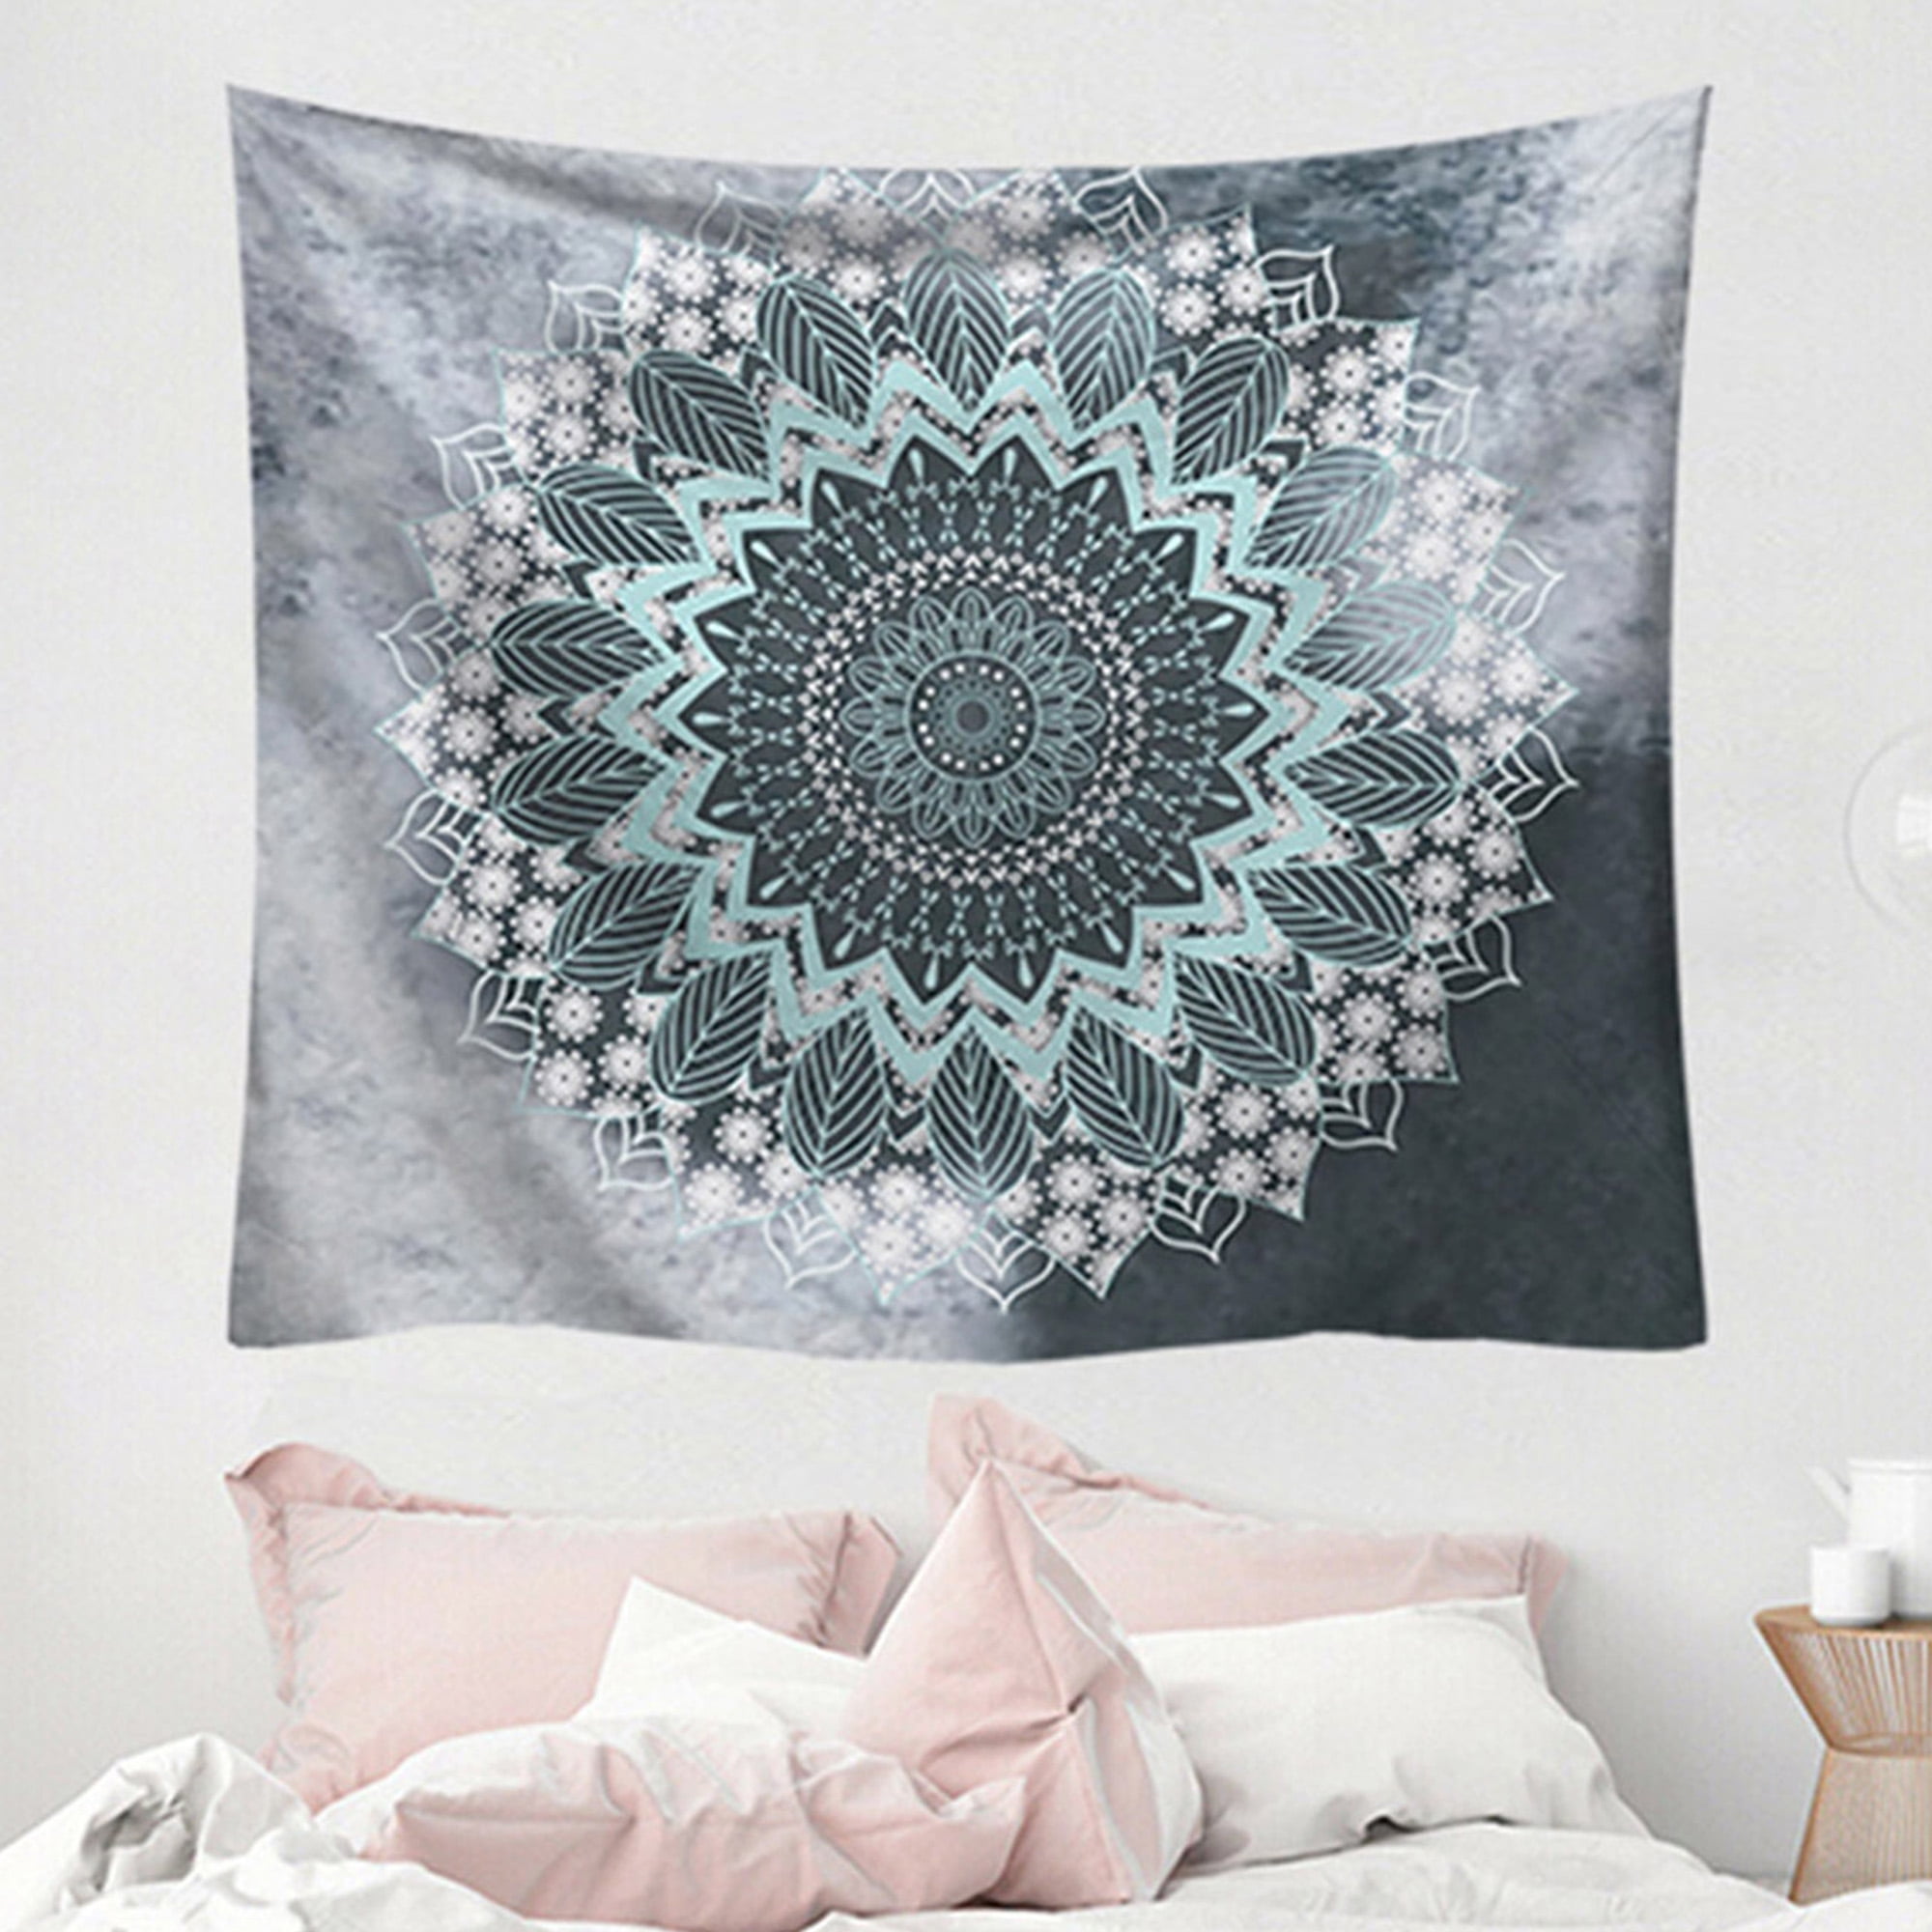 Yongto 59.1x35.4 inches Mandala Tapestry Purple Boho Hippie Psychedelic Mandala Blossom Wall Hanging for Dorm Bedroom Bedroom Table Runner Curtain Yoga Mat 